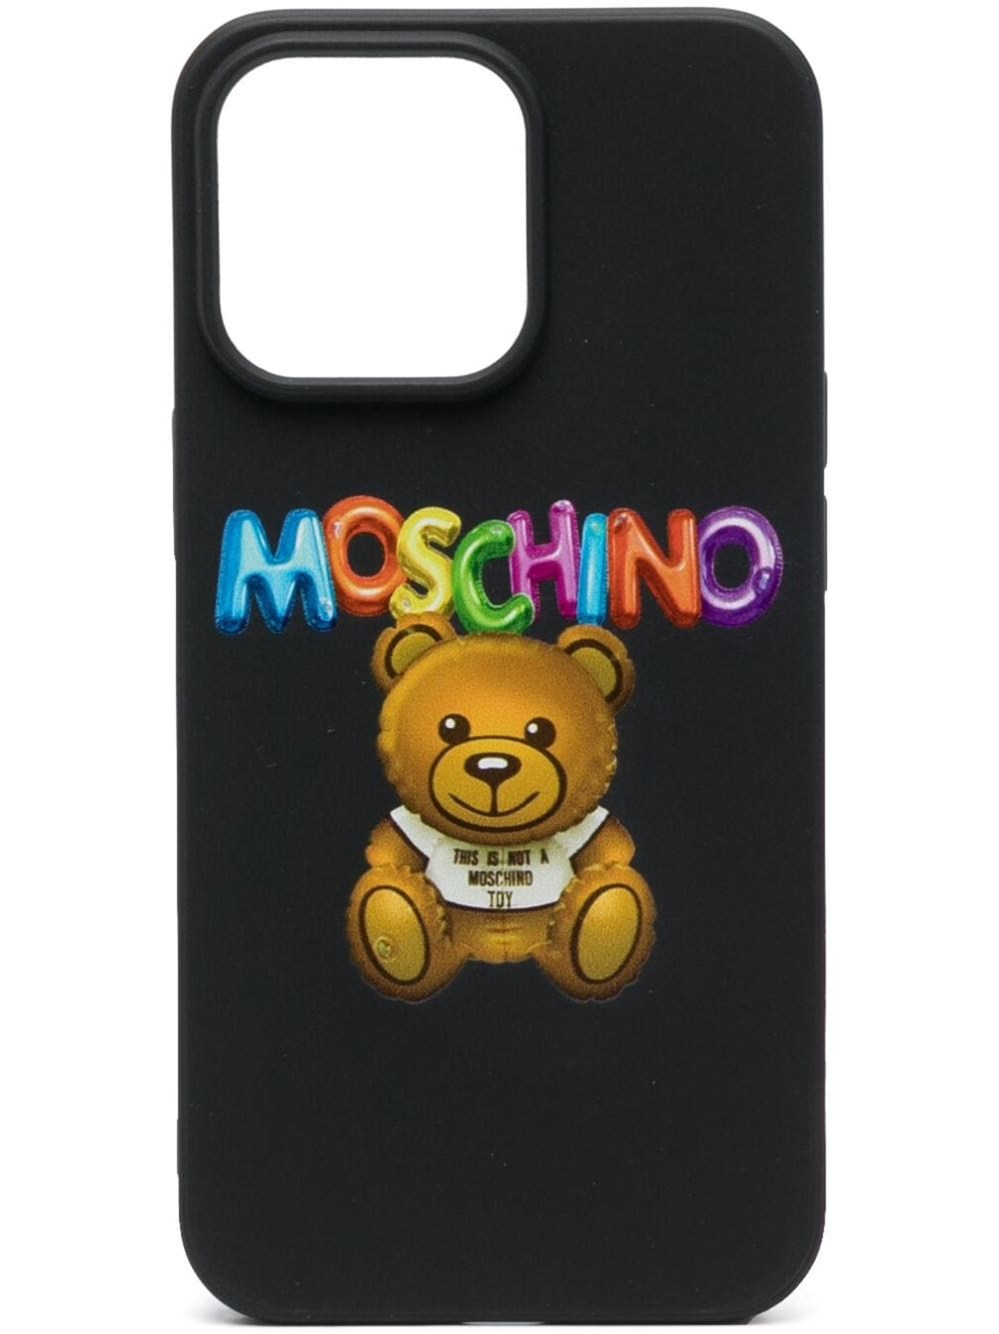 moschino Iphone 13 Pro case with printed logo available on